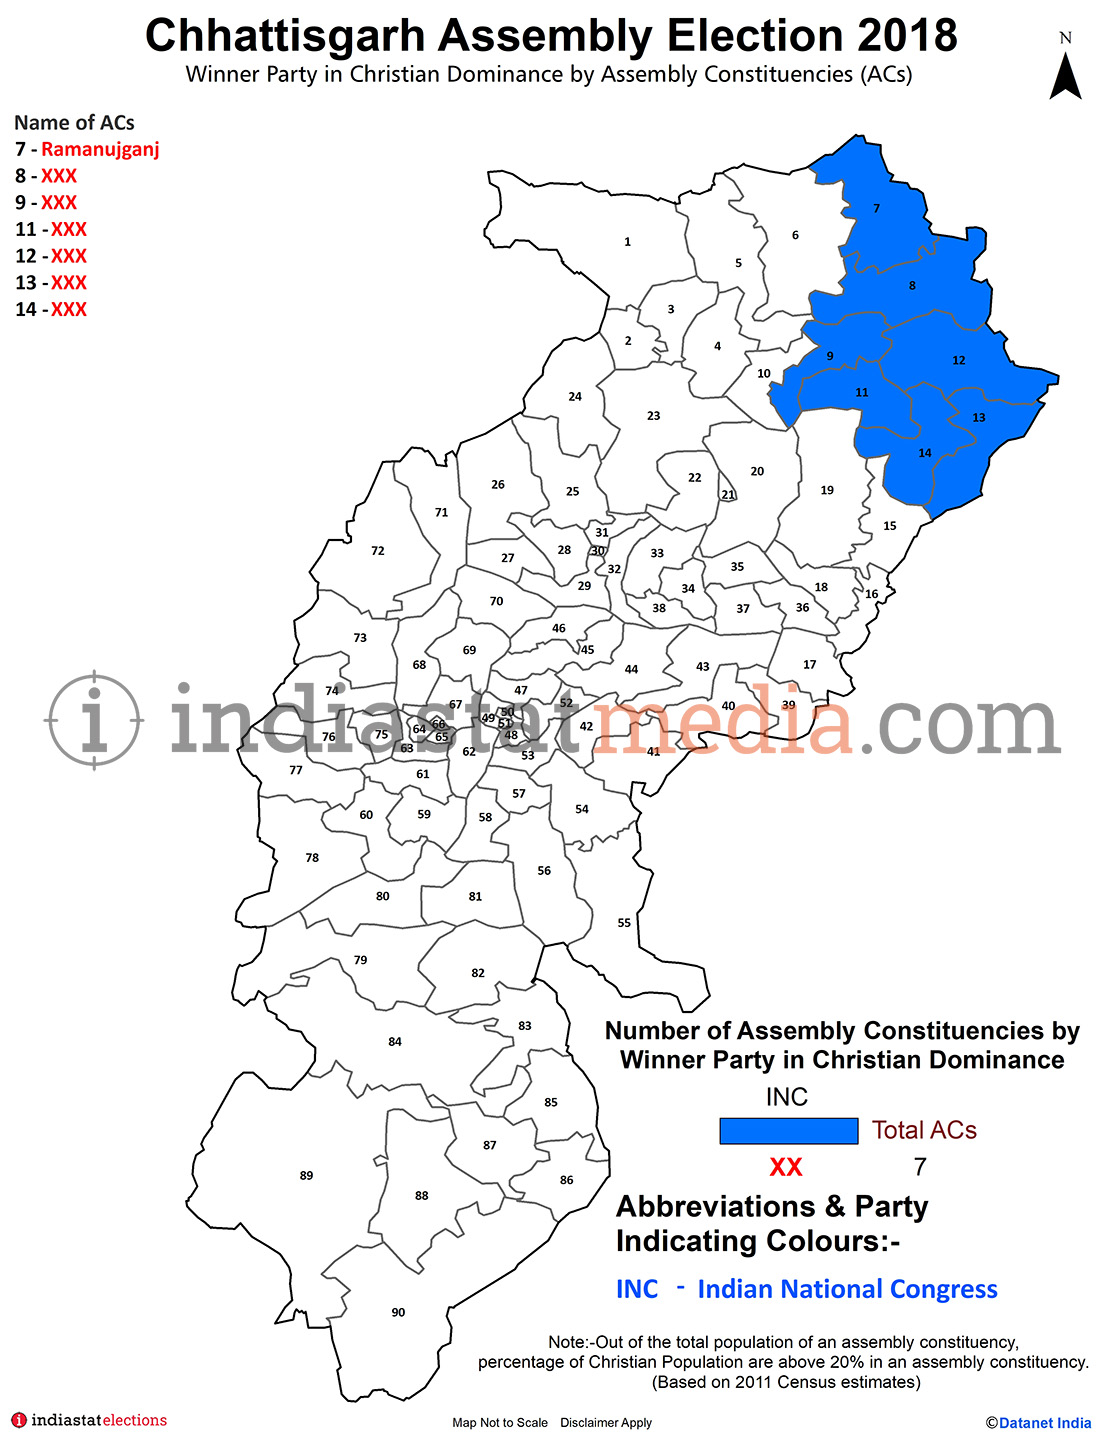 Winner Parties in Christian Dominance Constituencies in Chhattisgarh Assembly Election (2018)